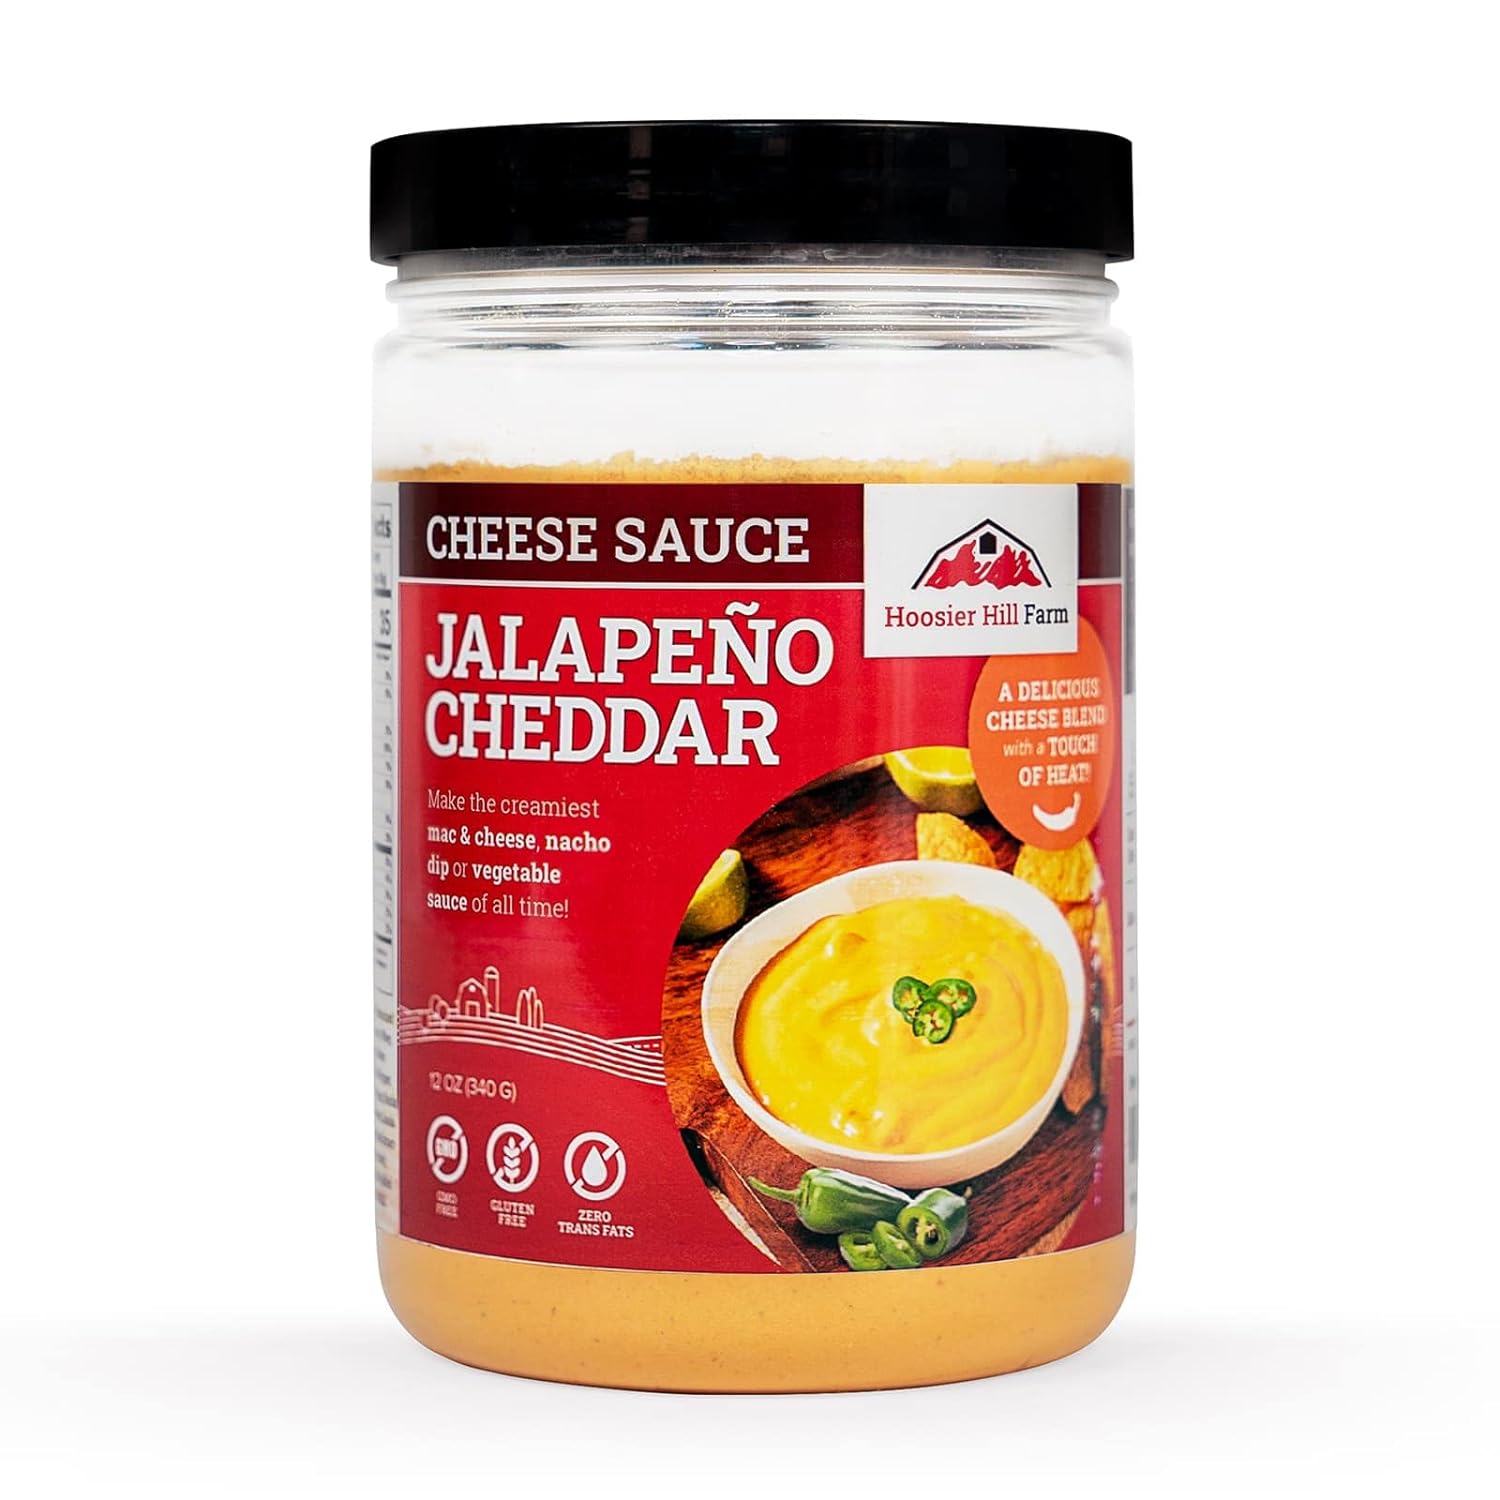 Hoosier Hill Farm Jalapeno Cheddar Cheese Sauce Mix, 12oz (Pack of 1)